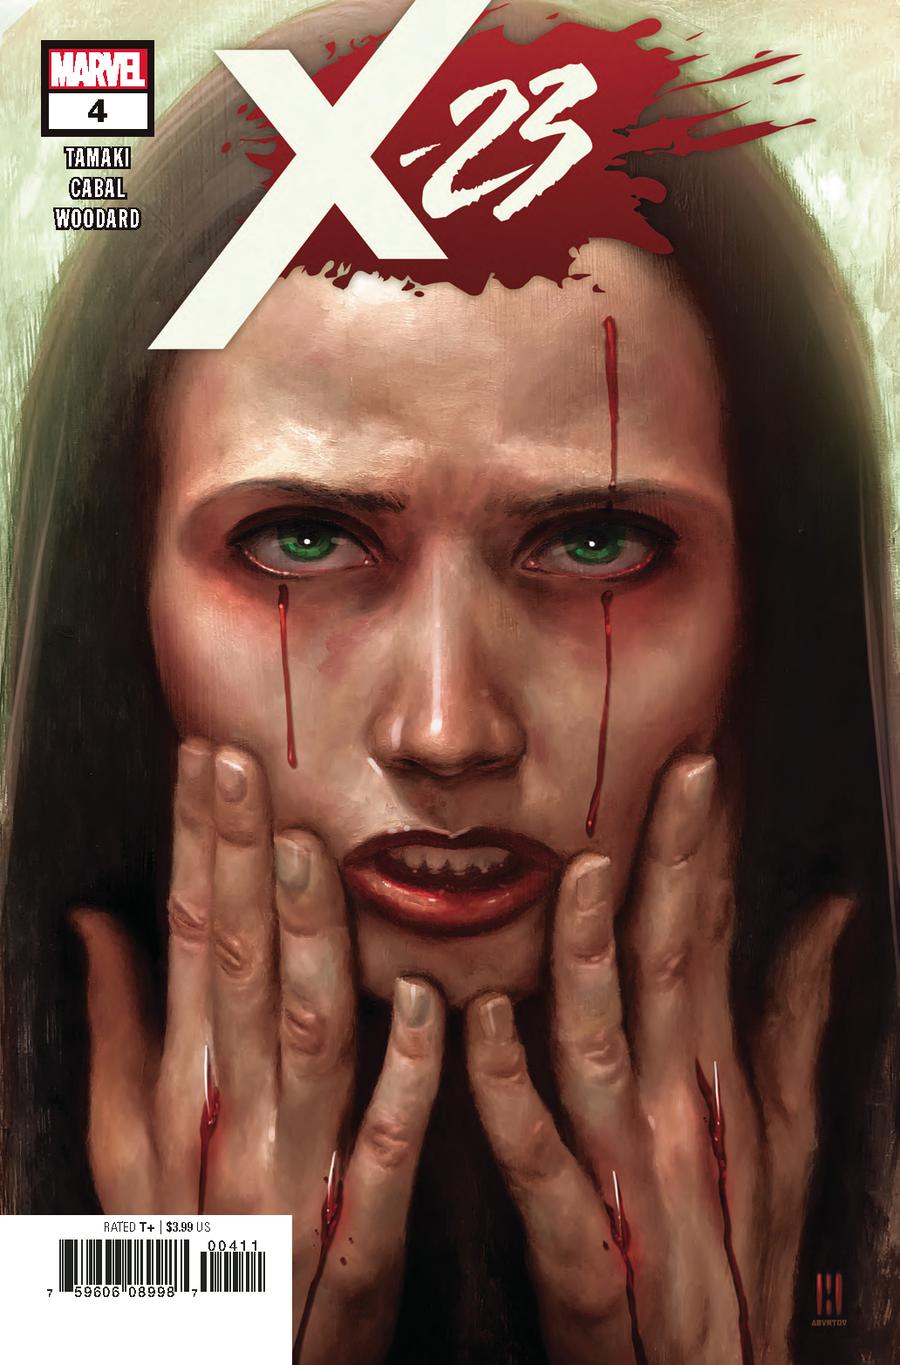 X-23 Vol 3 #4 Cover A Regular Mike Choi Cover